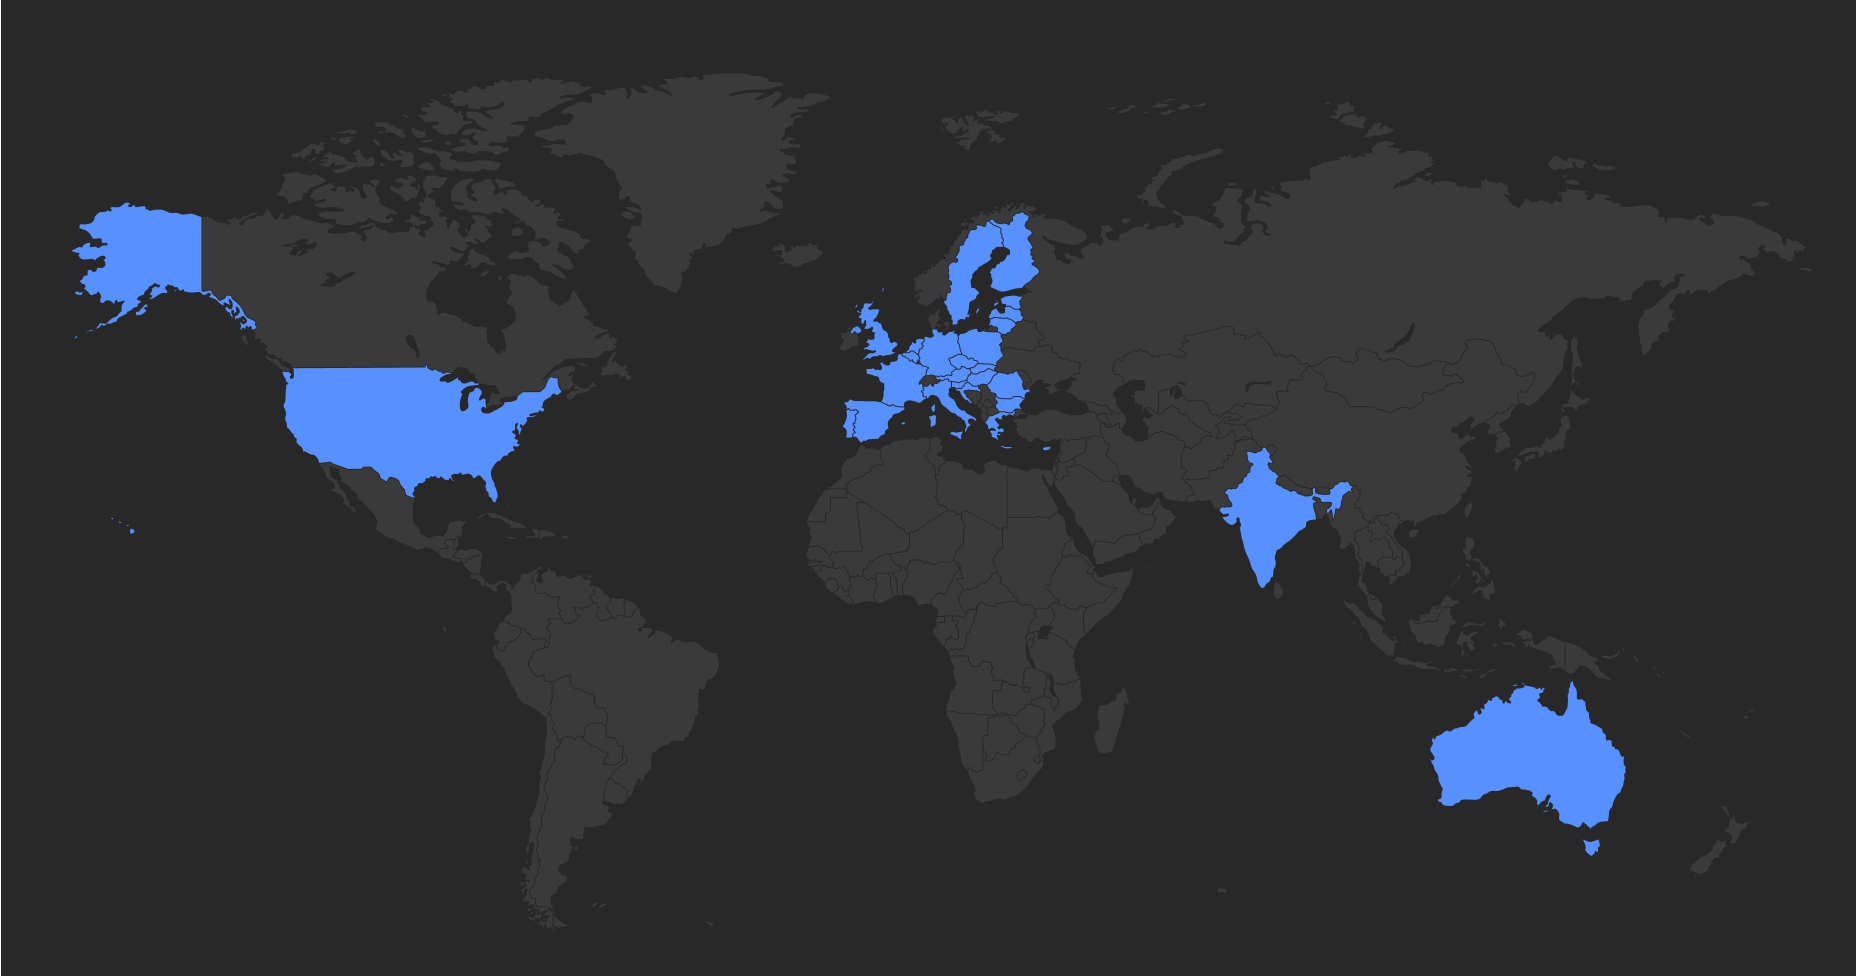 Map of the world highlighting the countries that have upcoming legislation